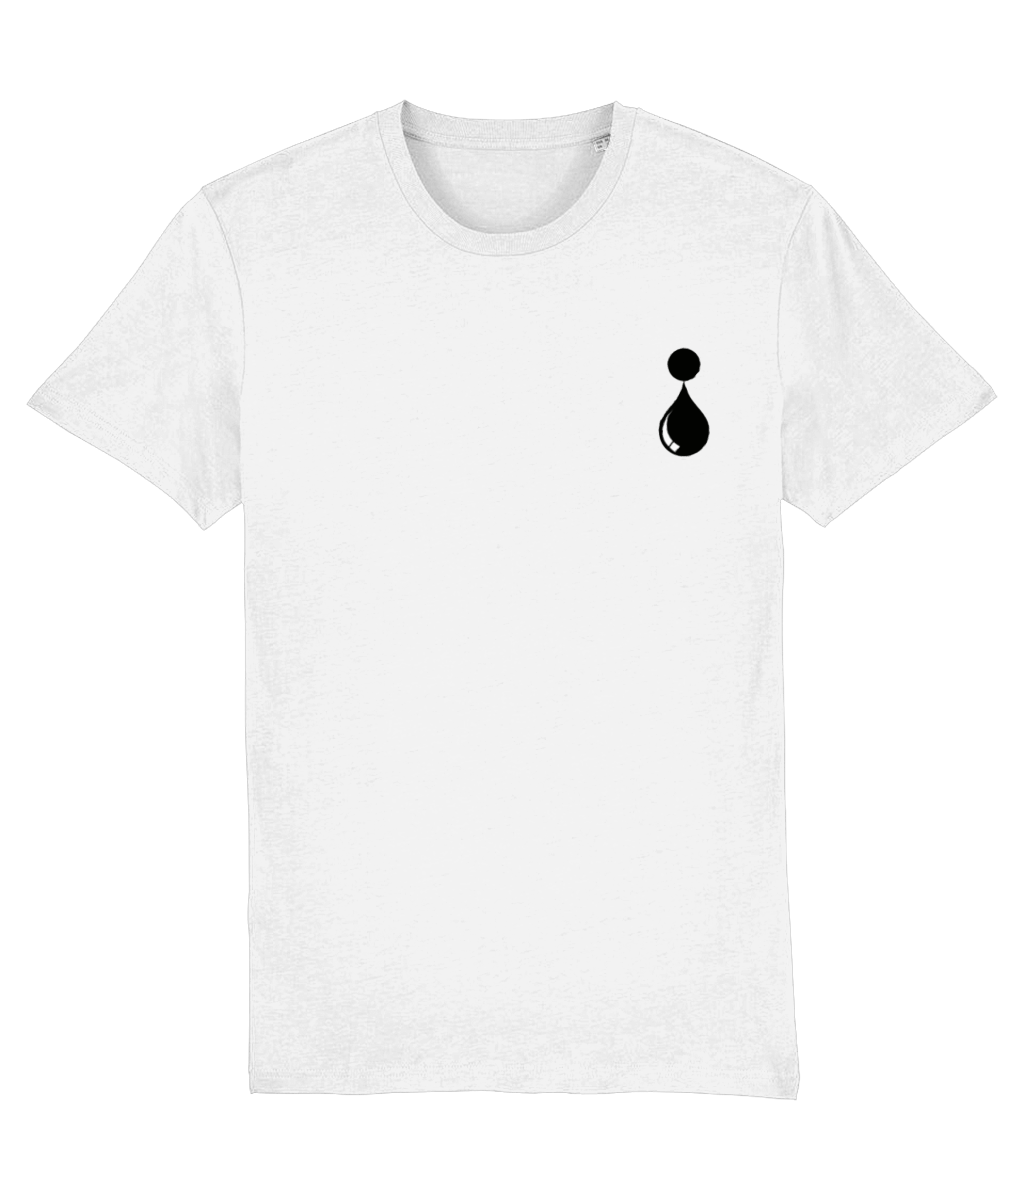 THE SUDDEN DROP TEE - WHITE